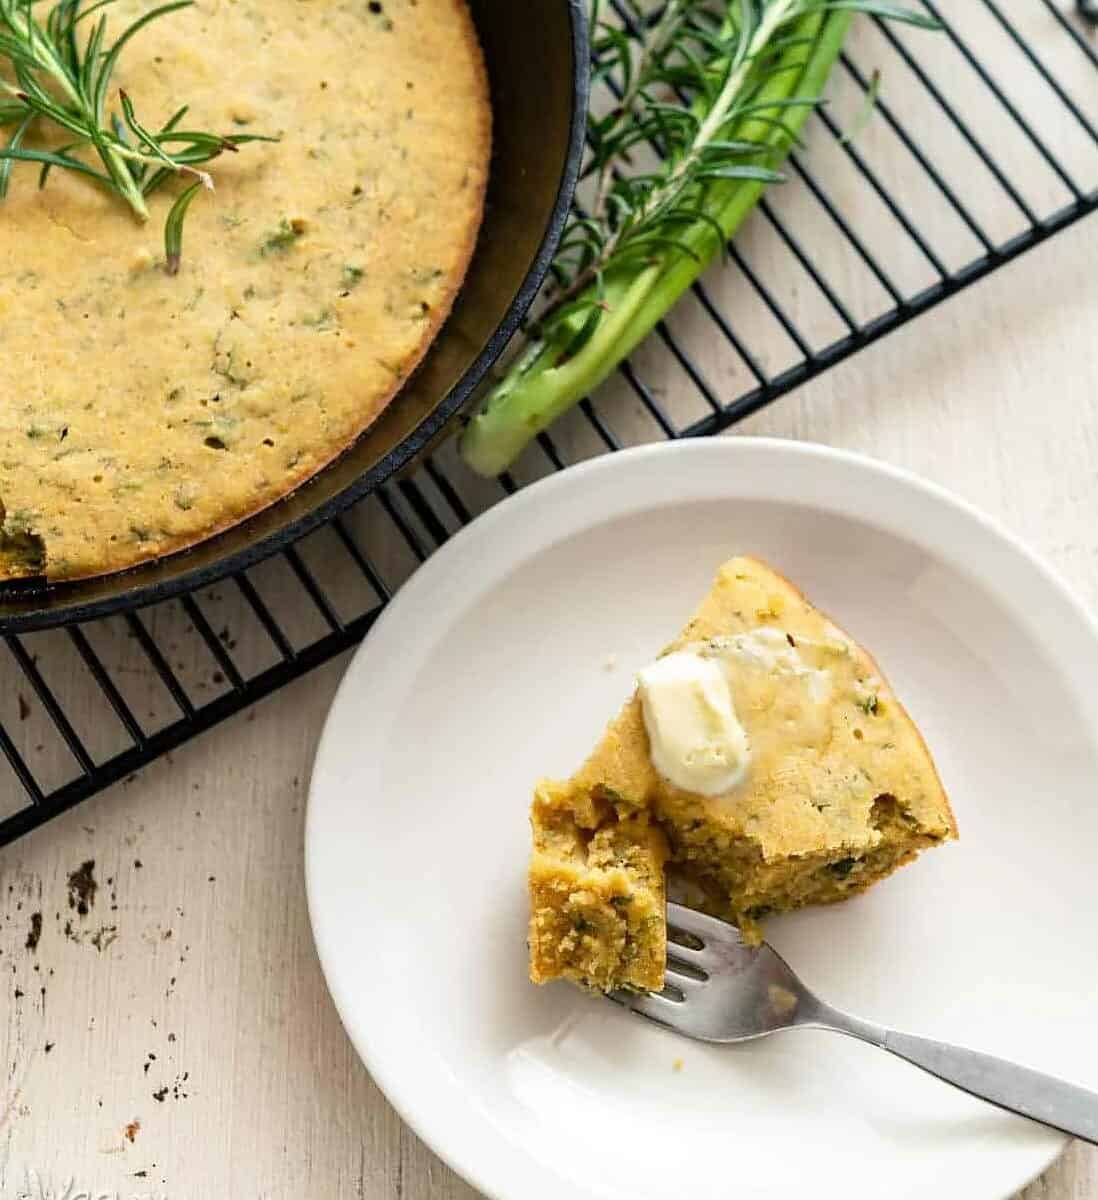  The natural sweetness of carrots adds depth to every bite of this cornbread.